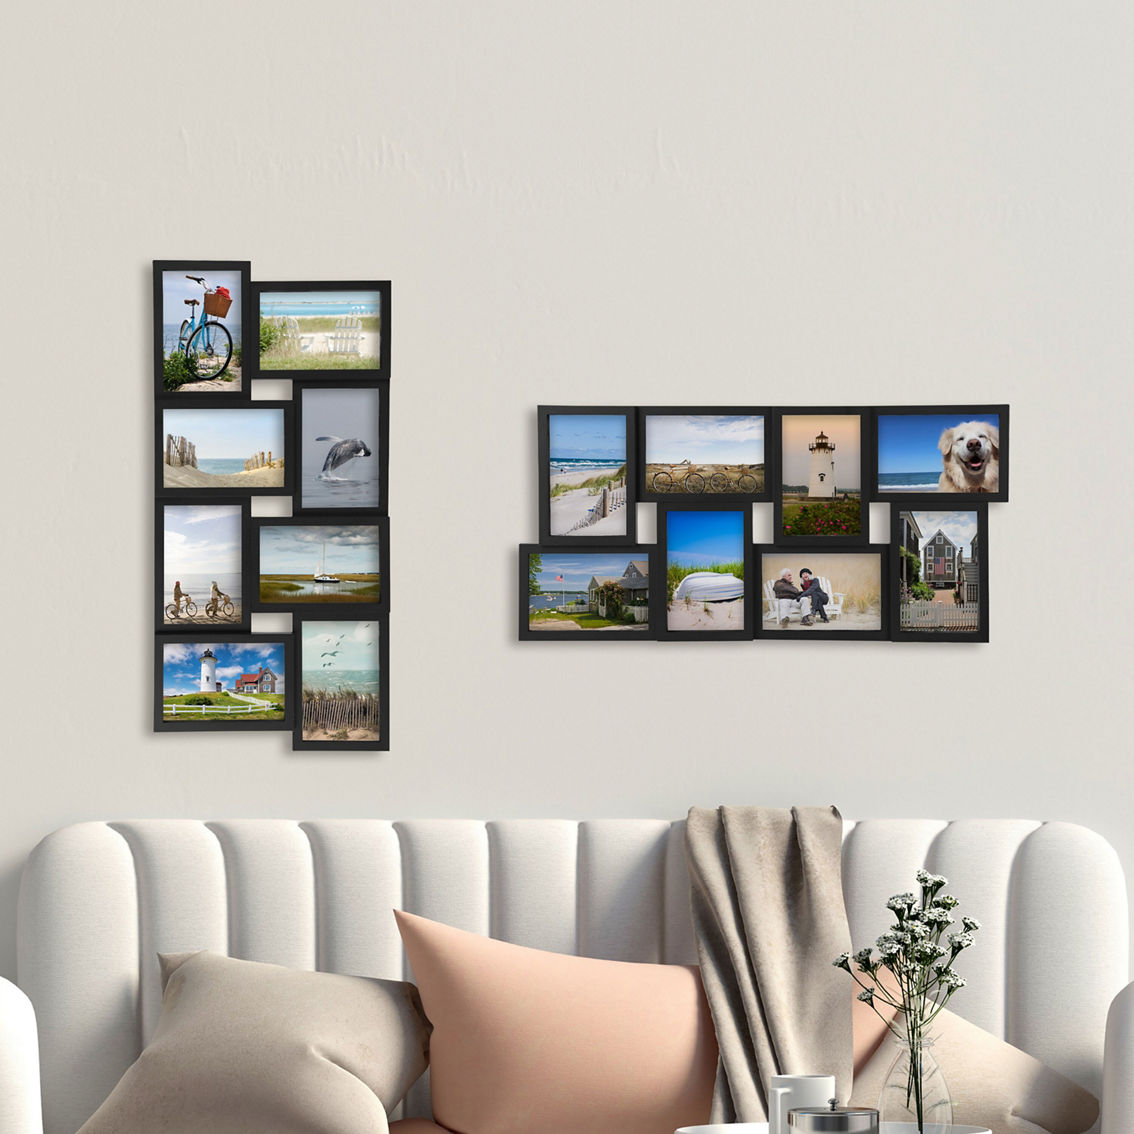 Melannco 24 x 12 in. 8 Opening Photo Collage Frame - Image 4 of 6